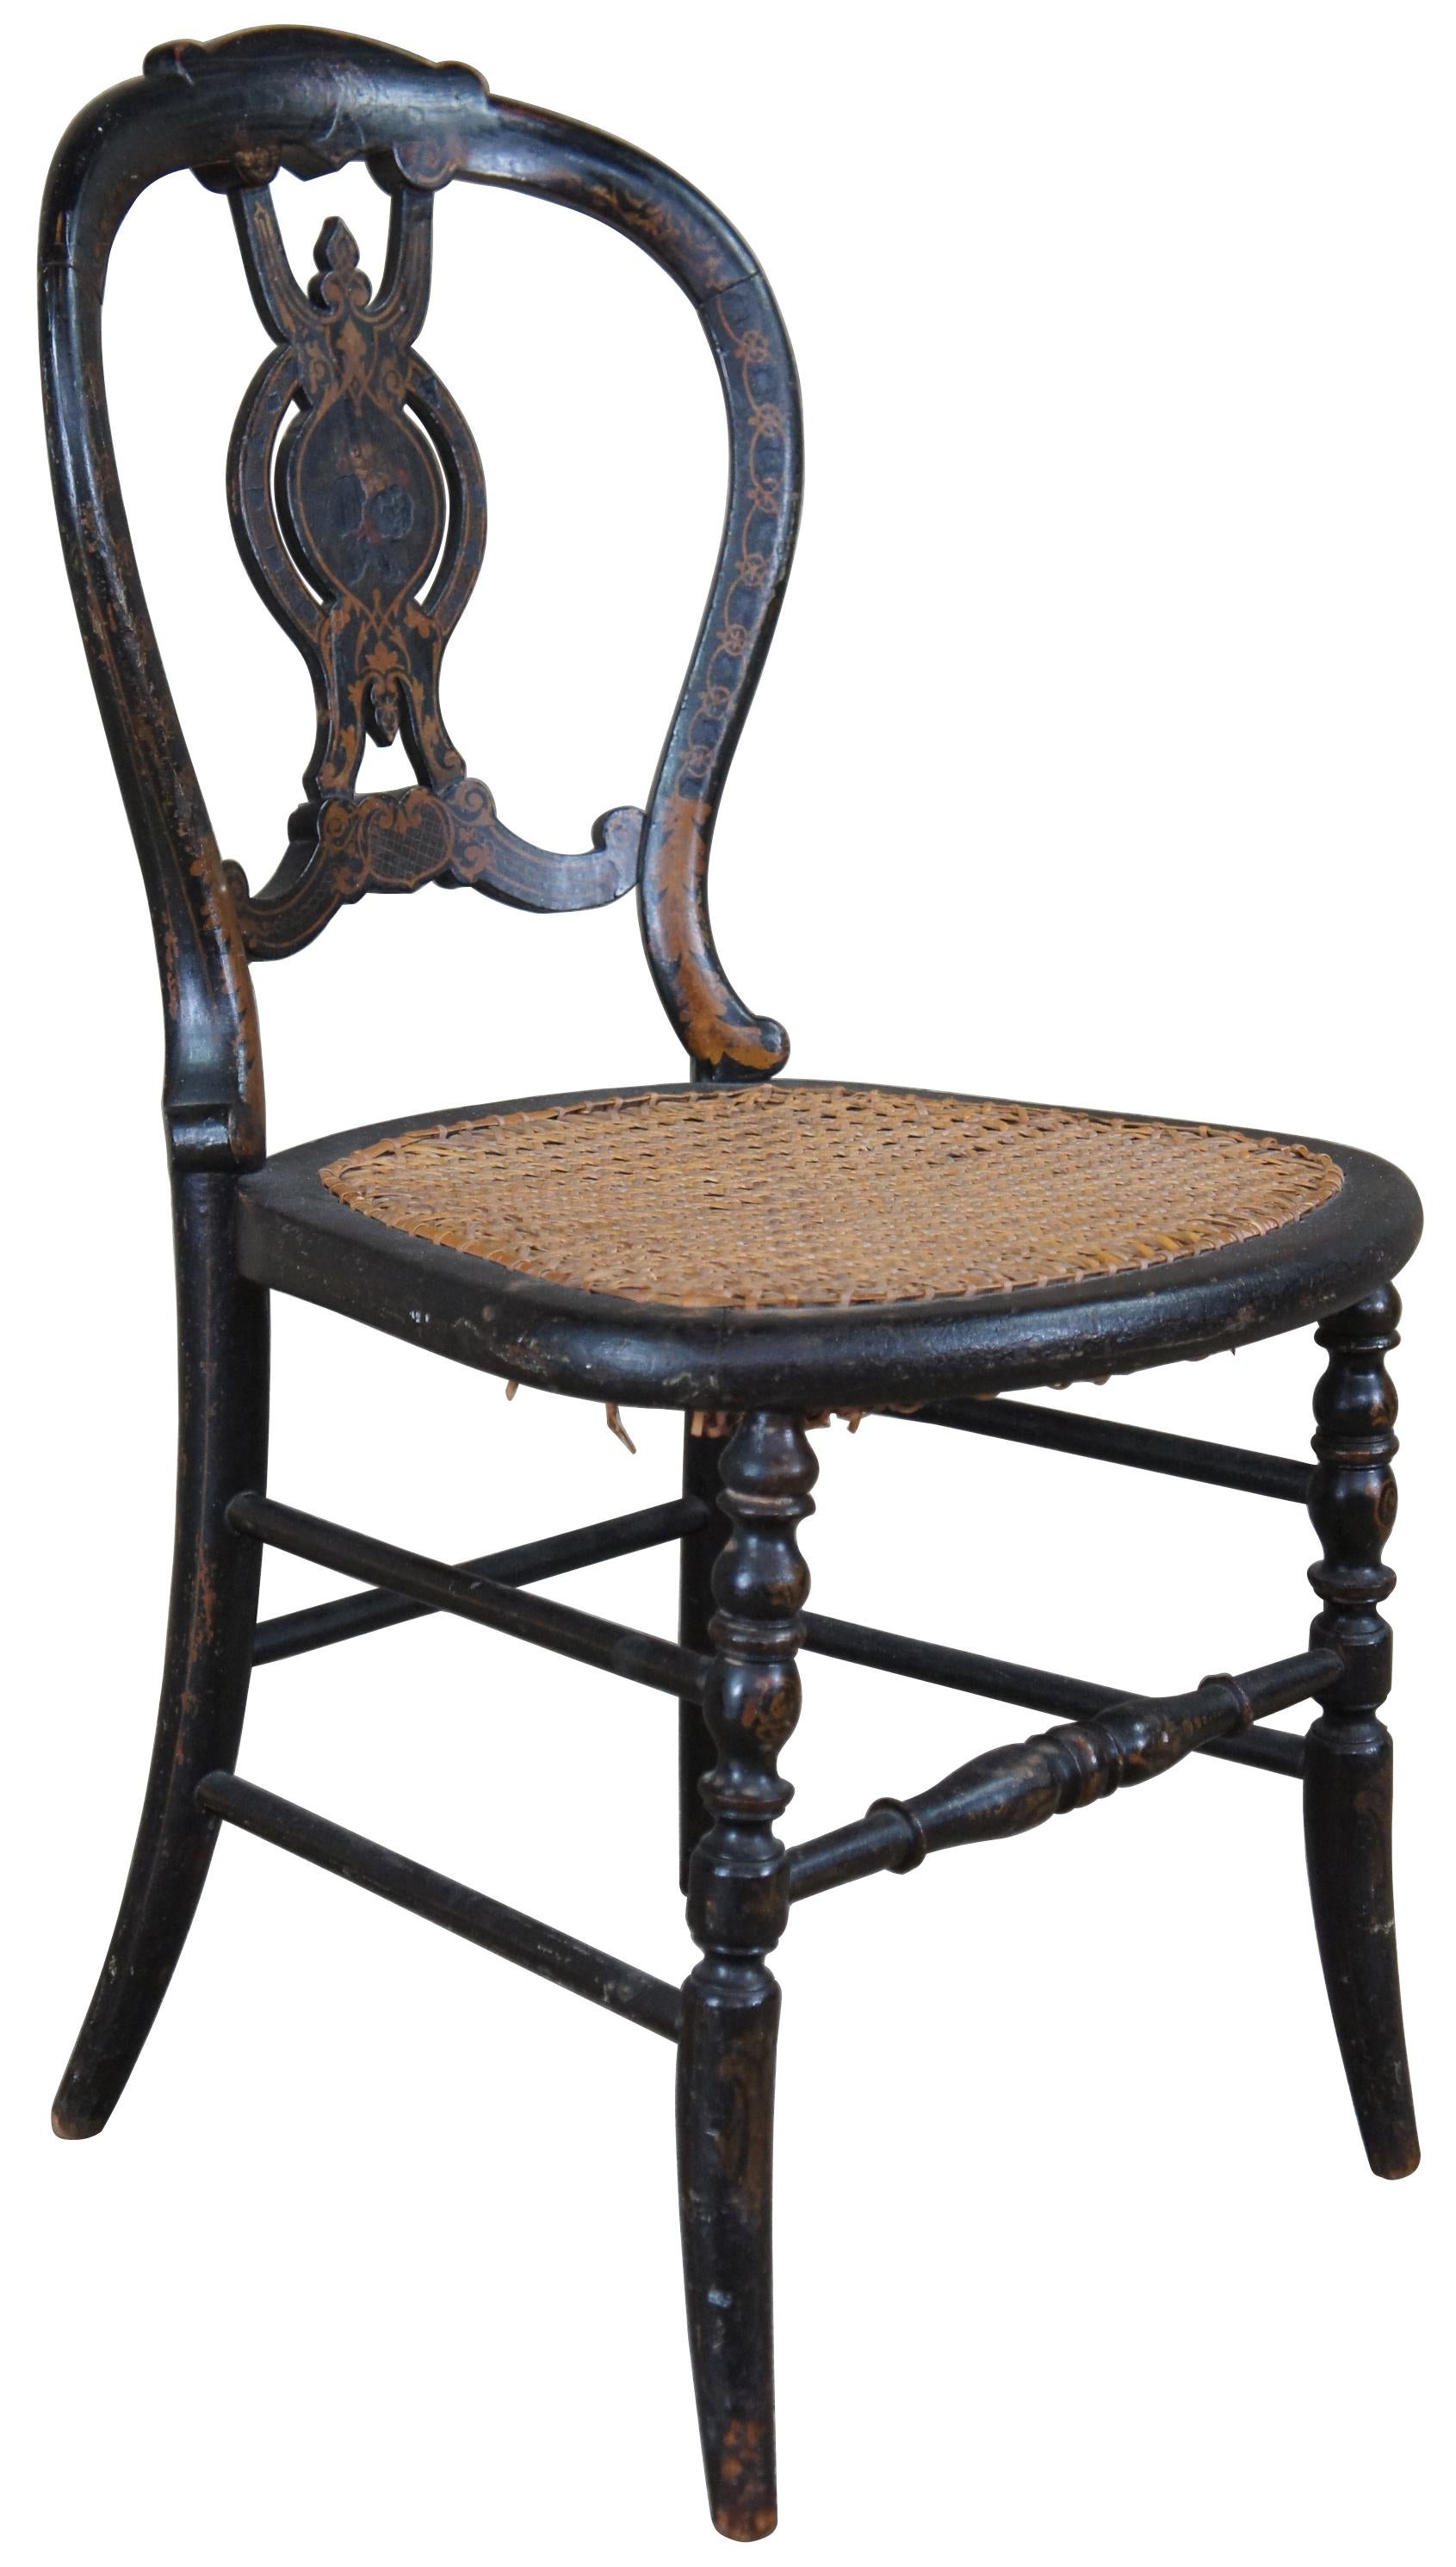 Antique Victorian parlor chair. Hand stencilled with an ornate pierced back with a caned seat and turned legs.
  